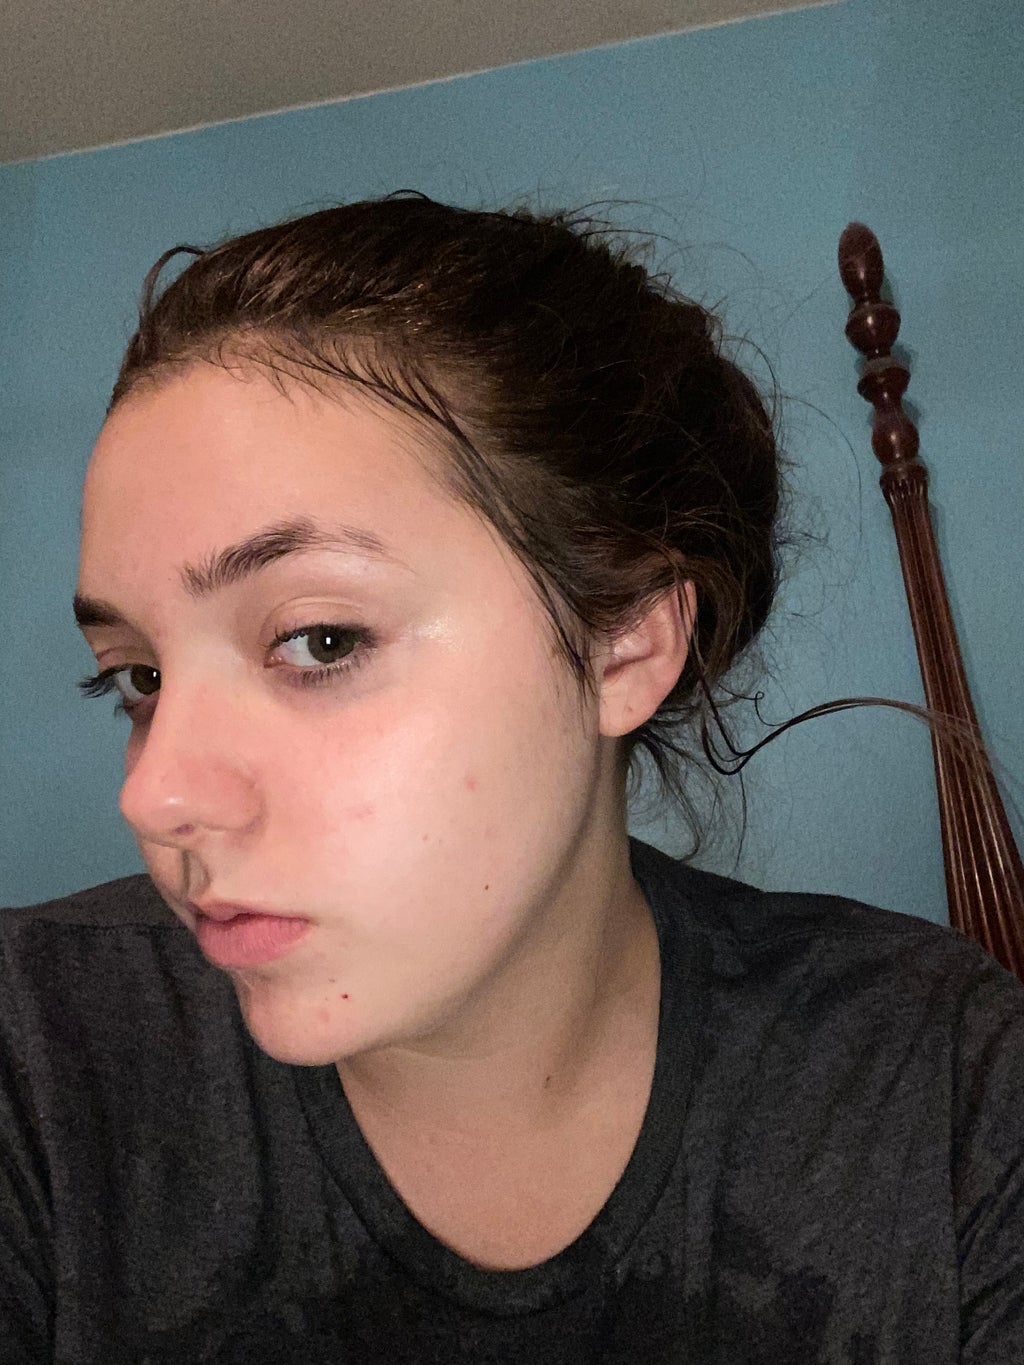 after/progress photo of my skin after routine